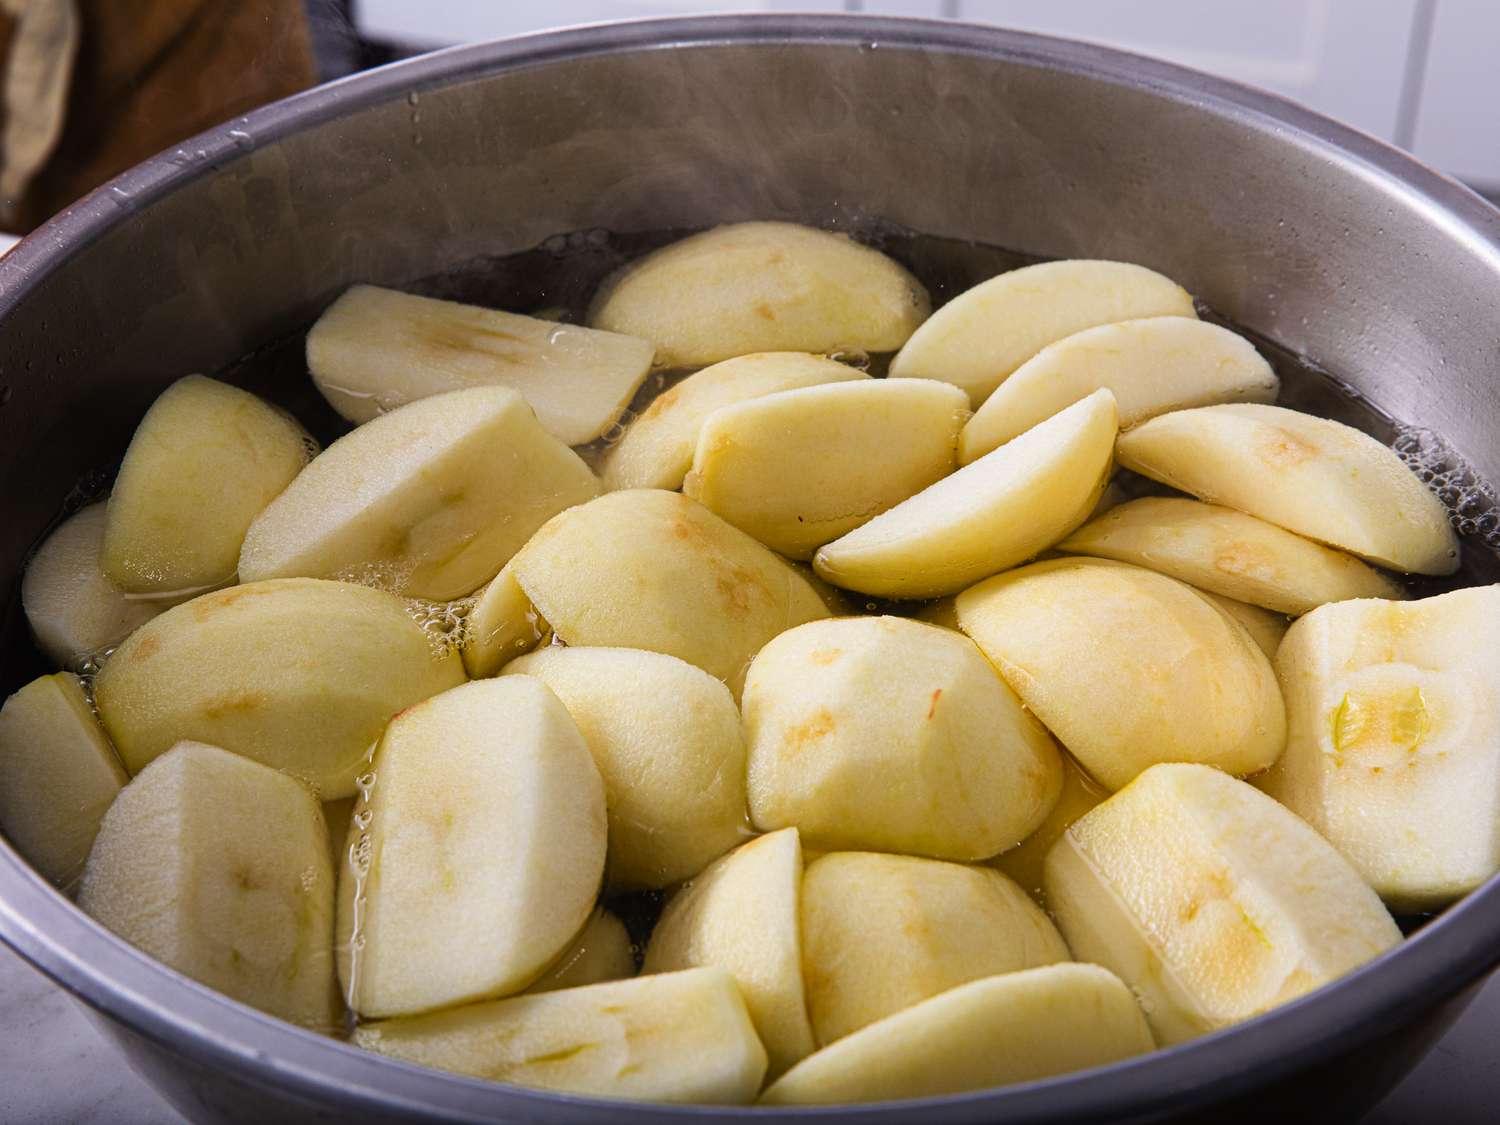 Apples in boiling water